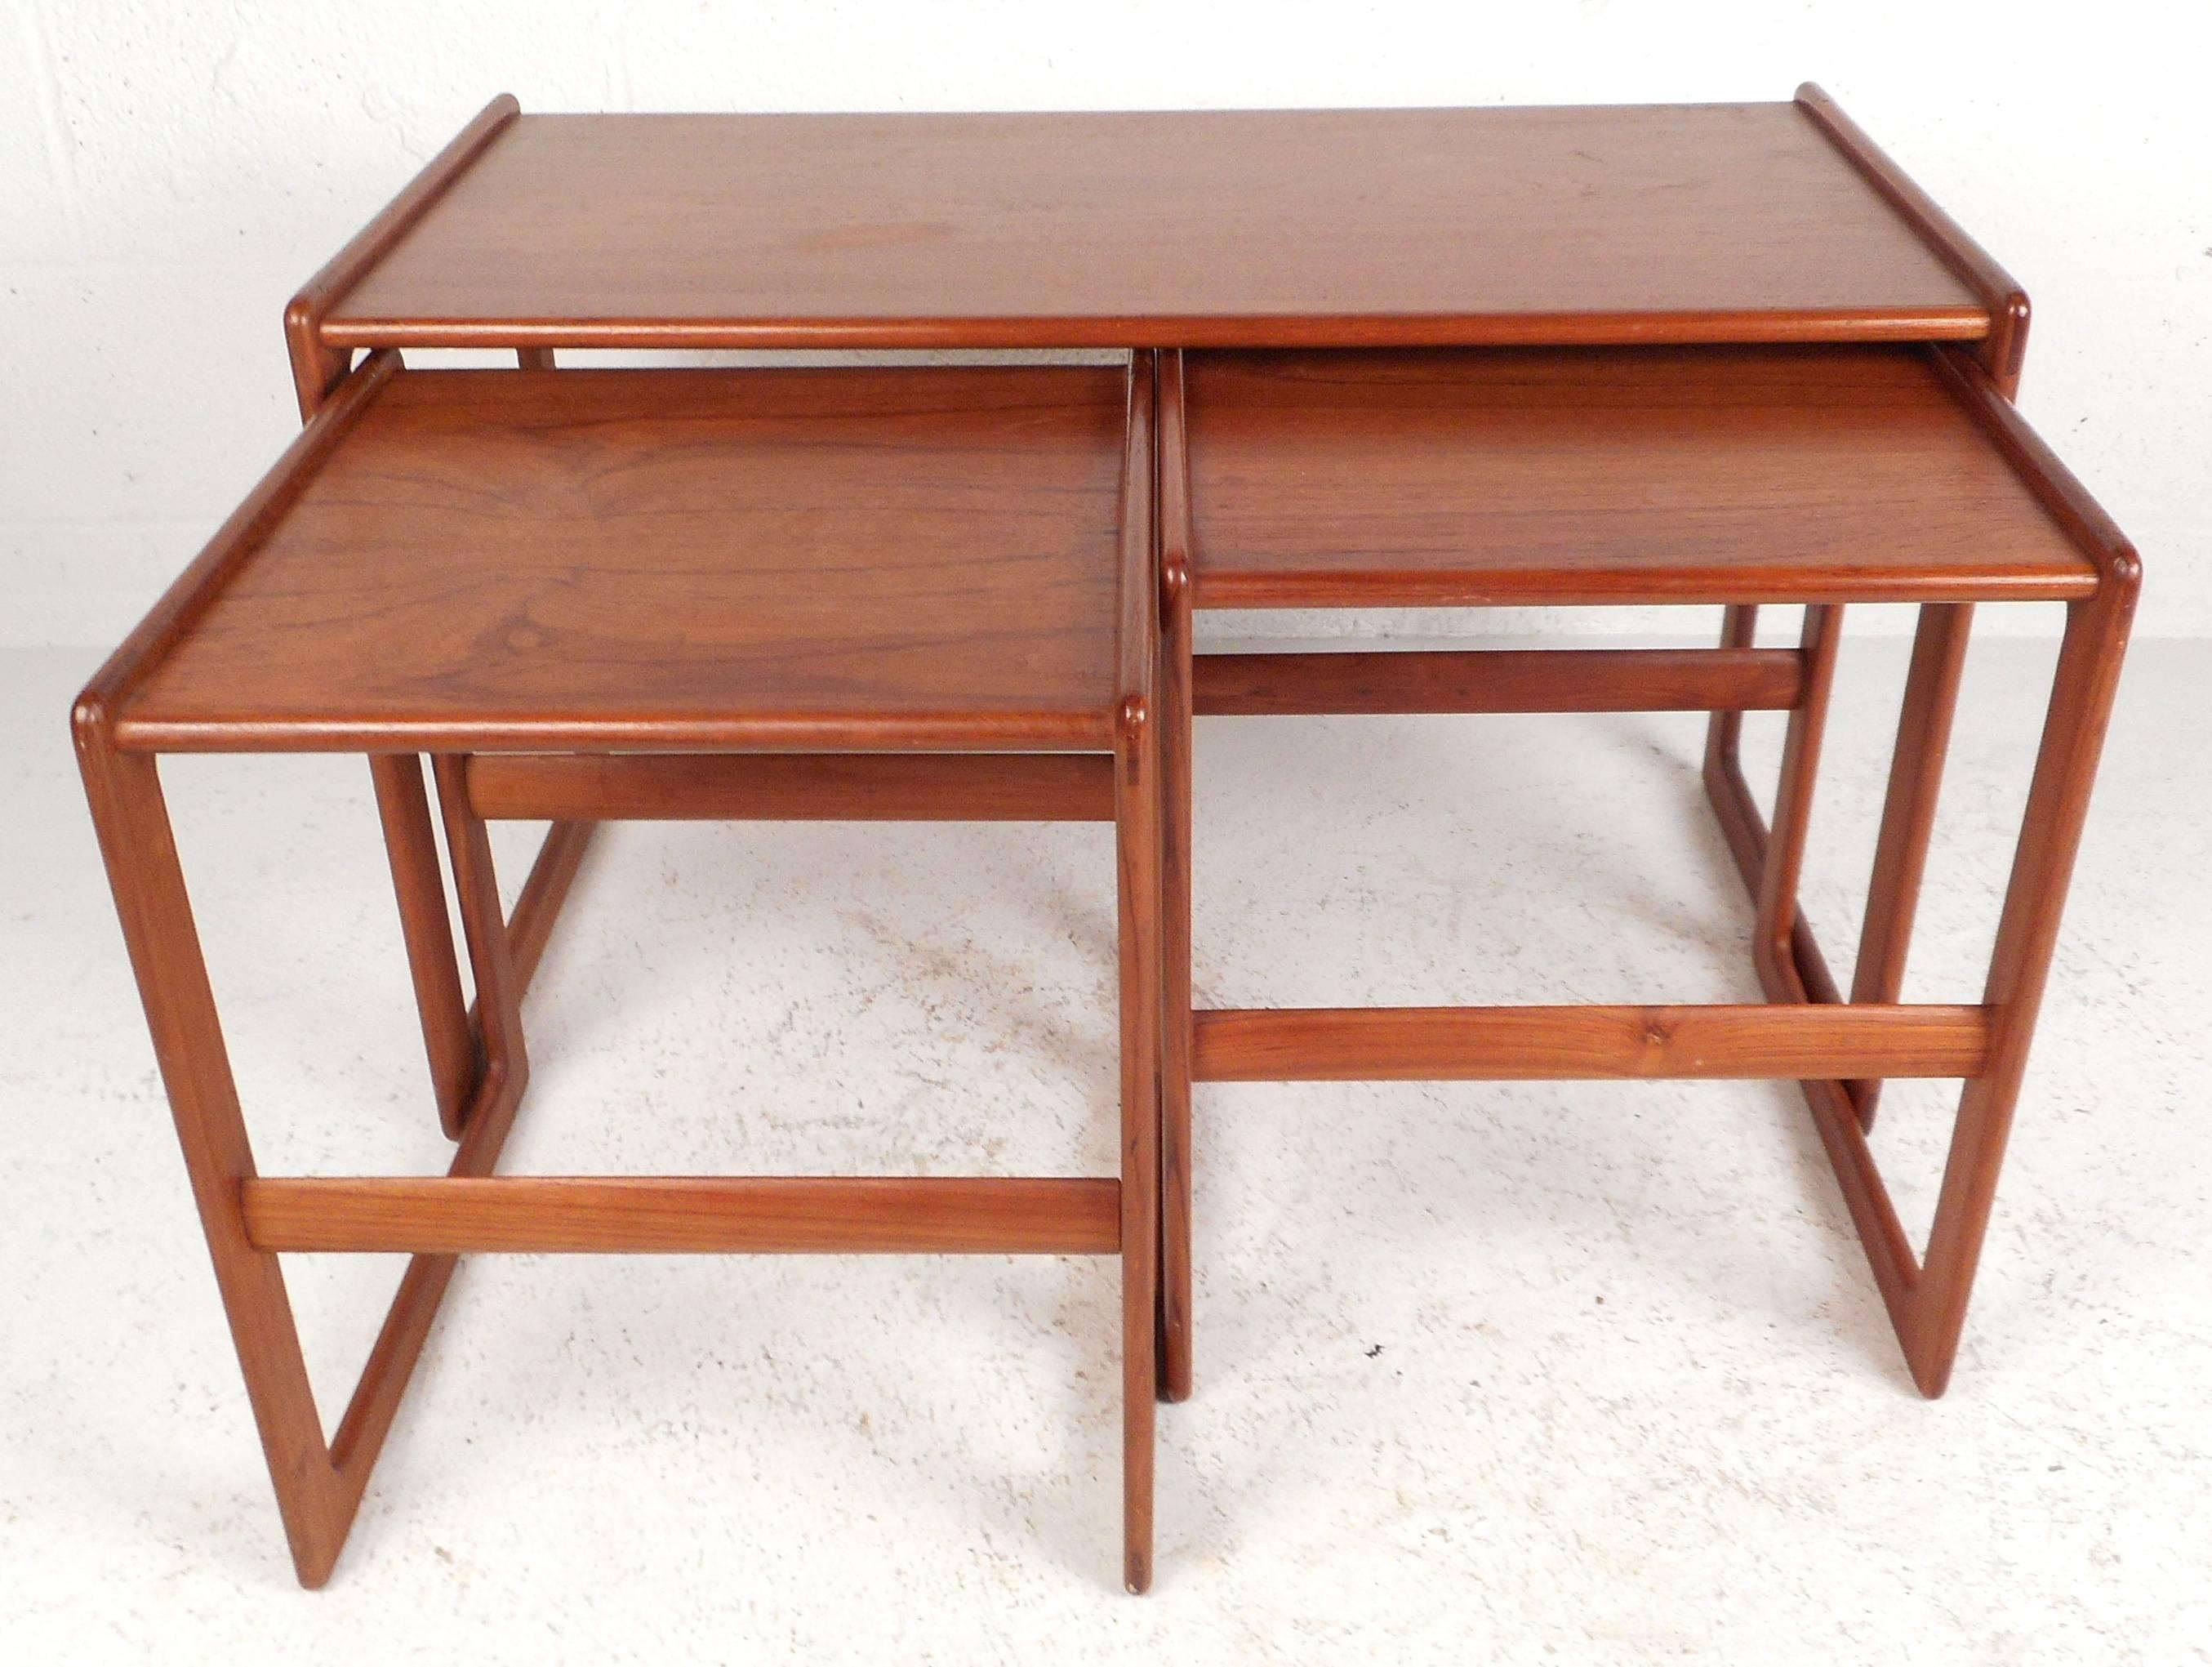 Stunning set of three Mid-Century Modern stacking tables feature beautiful teakwood grain and unique sled legs. The stylish design allows the two smaller tables to nestle comfortably underneath the larger one offering convenient storage. Beautiful